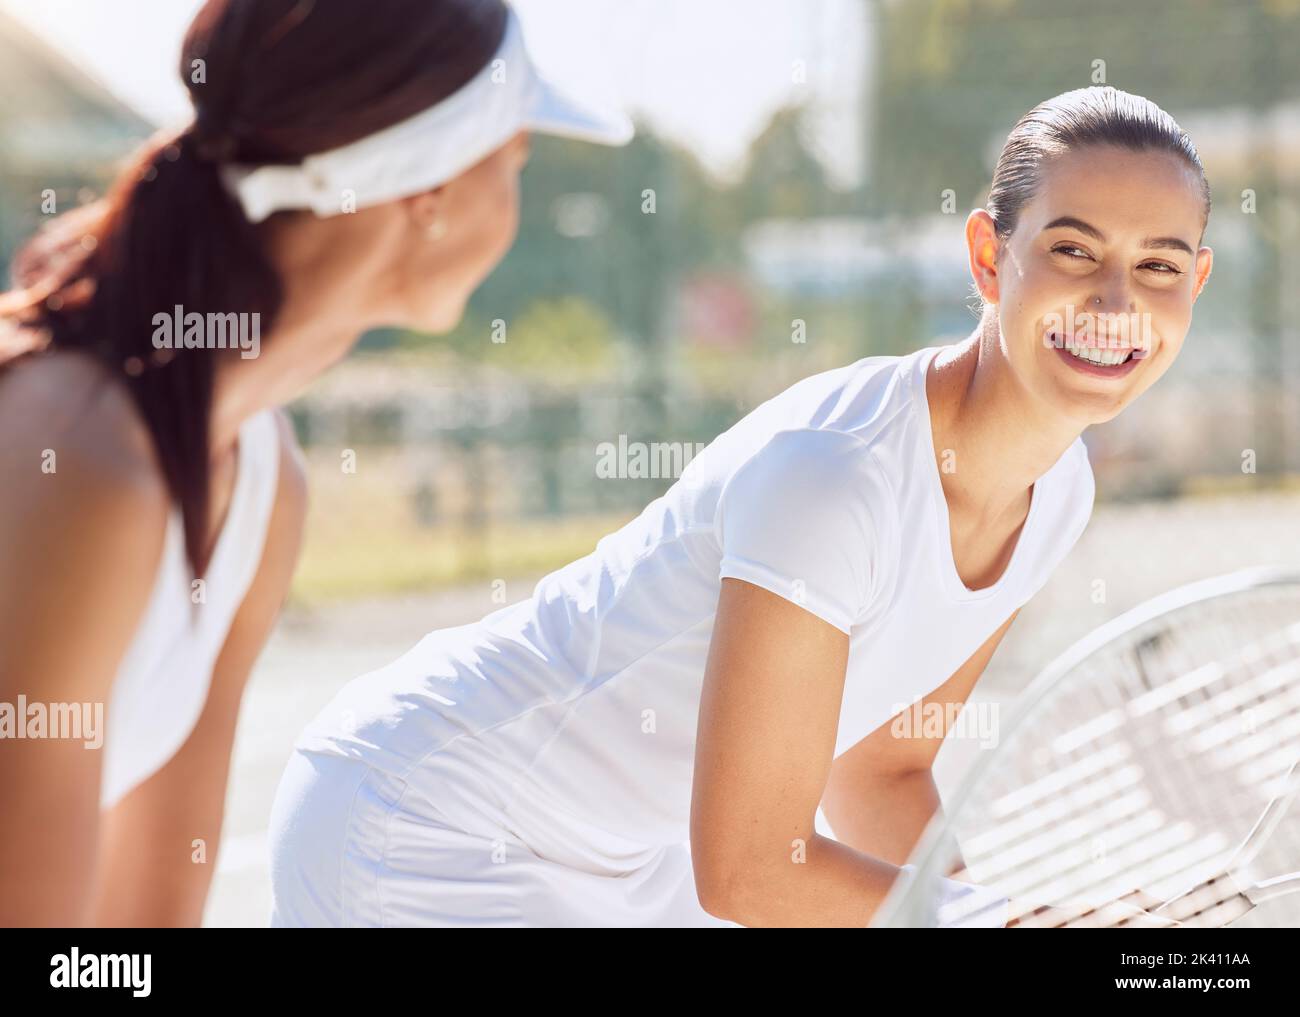 Tennis, tennis court and sports women with partner and smile on their face. Two females playing sport holding tennis rackets ready to serve, win and Stock Photo